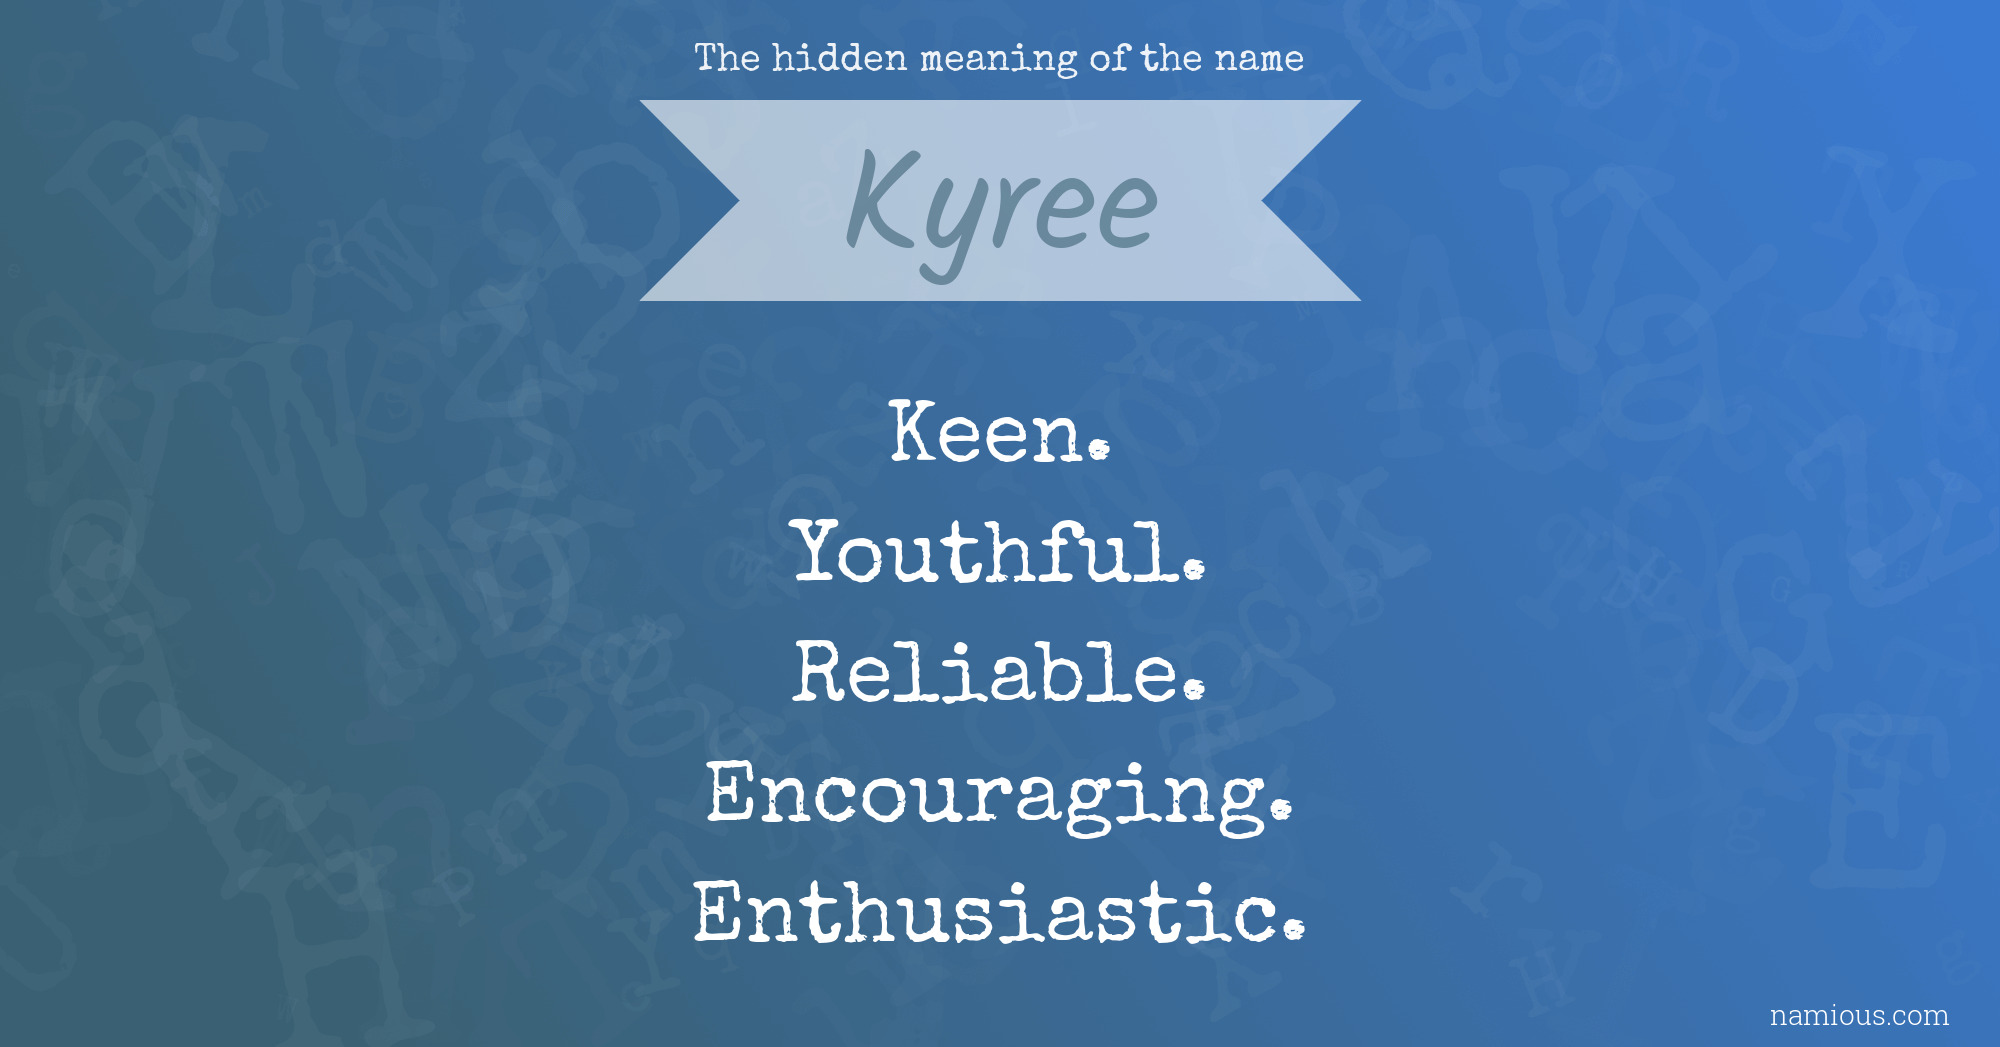 The hidden meaning of the name Kyree